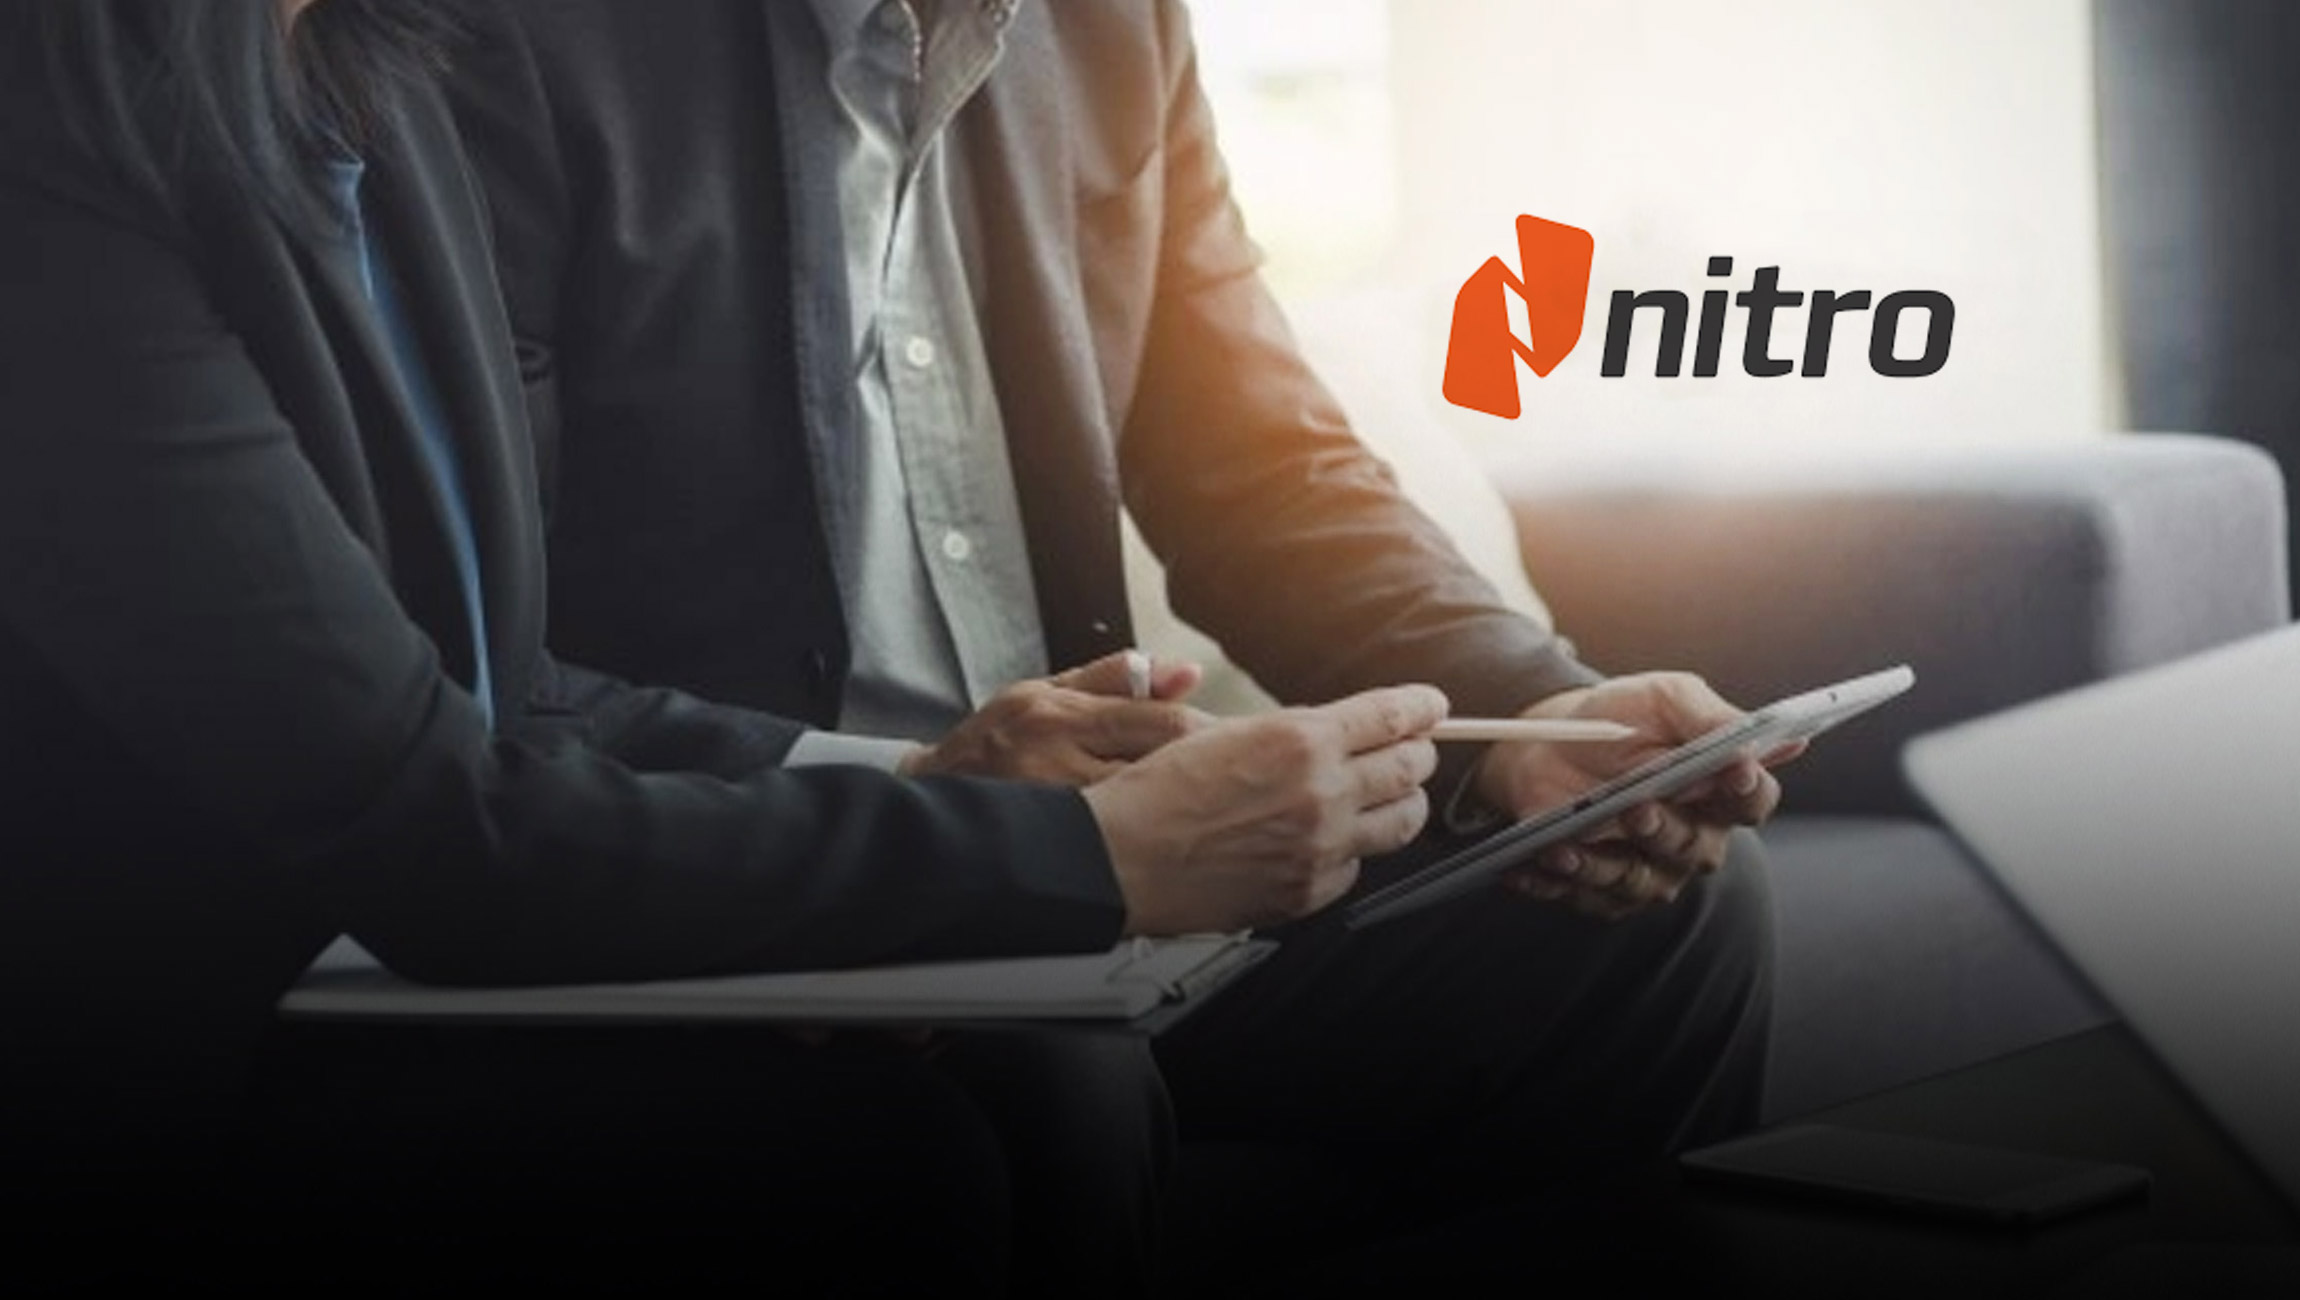 eSign and PDF Workflow Leader, Nitro Software, Launches Next Innovation Cycle